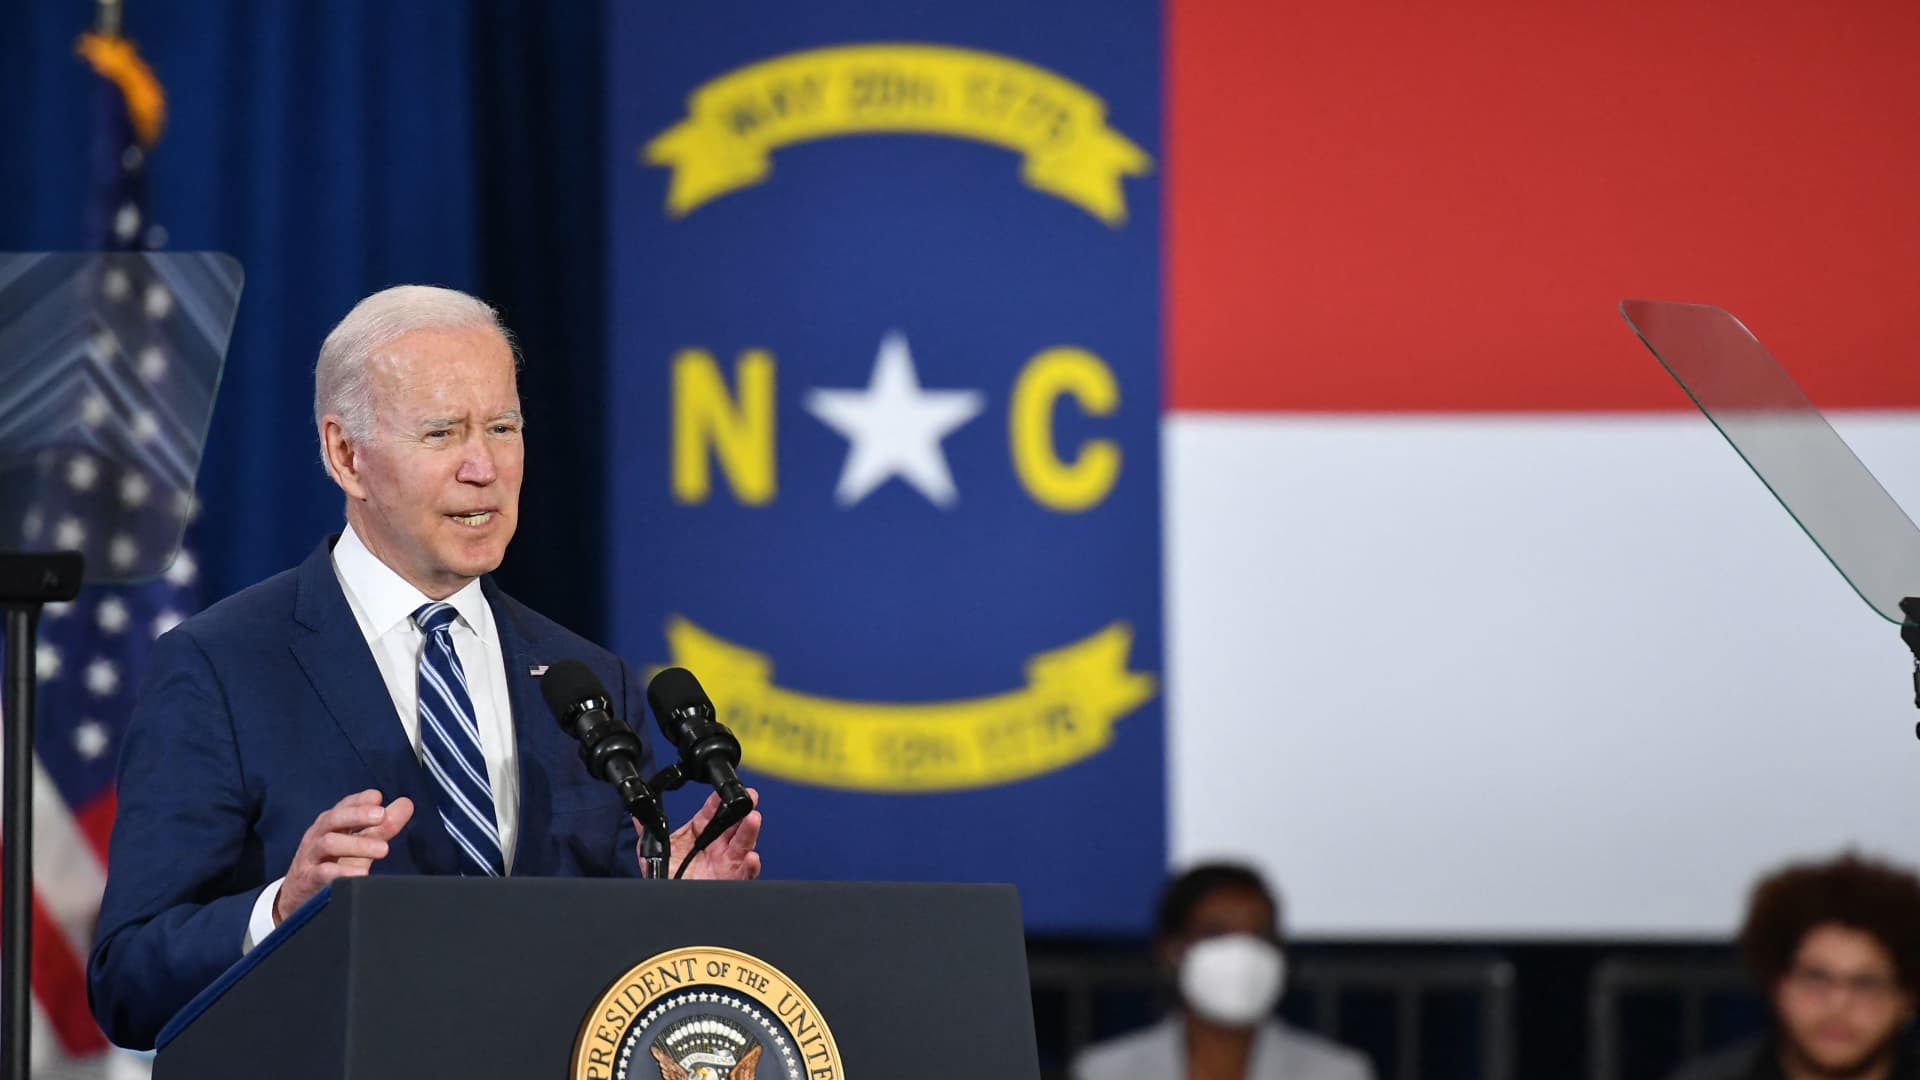 US President Joe Biden speaks at the Alumni-Foundation Event Center of North Carolina Agricultural and Technical State University in Greensboro, North Carolina on April 14, 2022. 